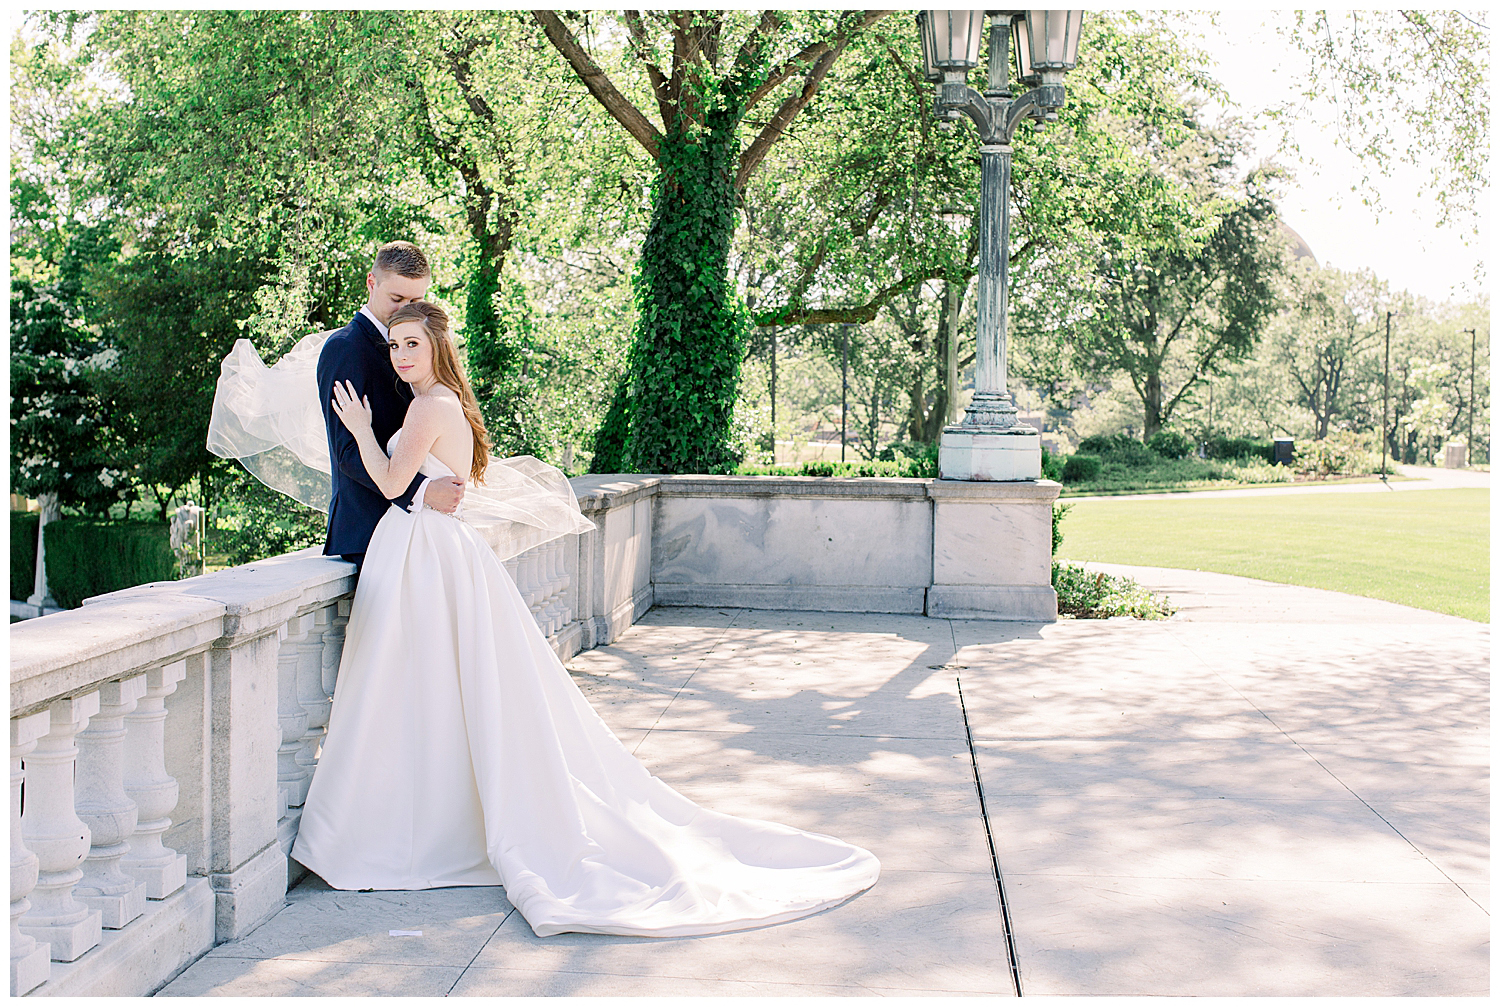 Walters_Cleveland_Museum_of_Art_Wedding_Portraits_Kate_Mannella_Photography